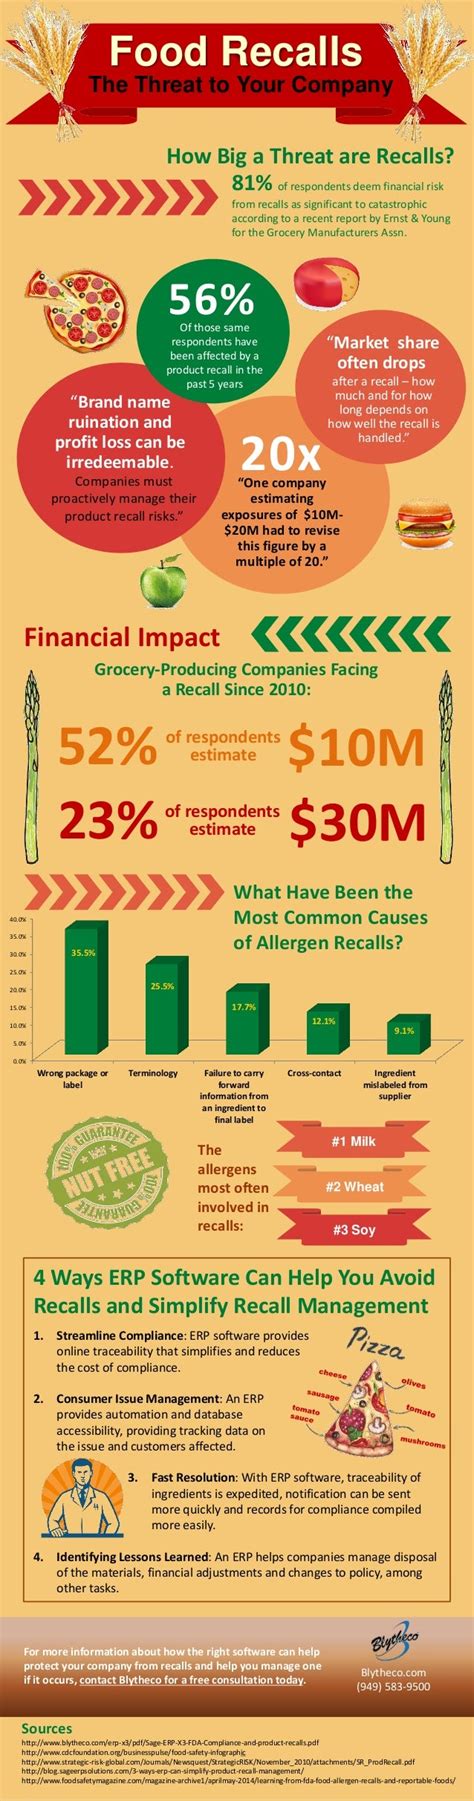 Food Recalls Infographic The Threat To Your Company